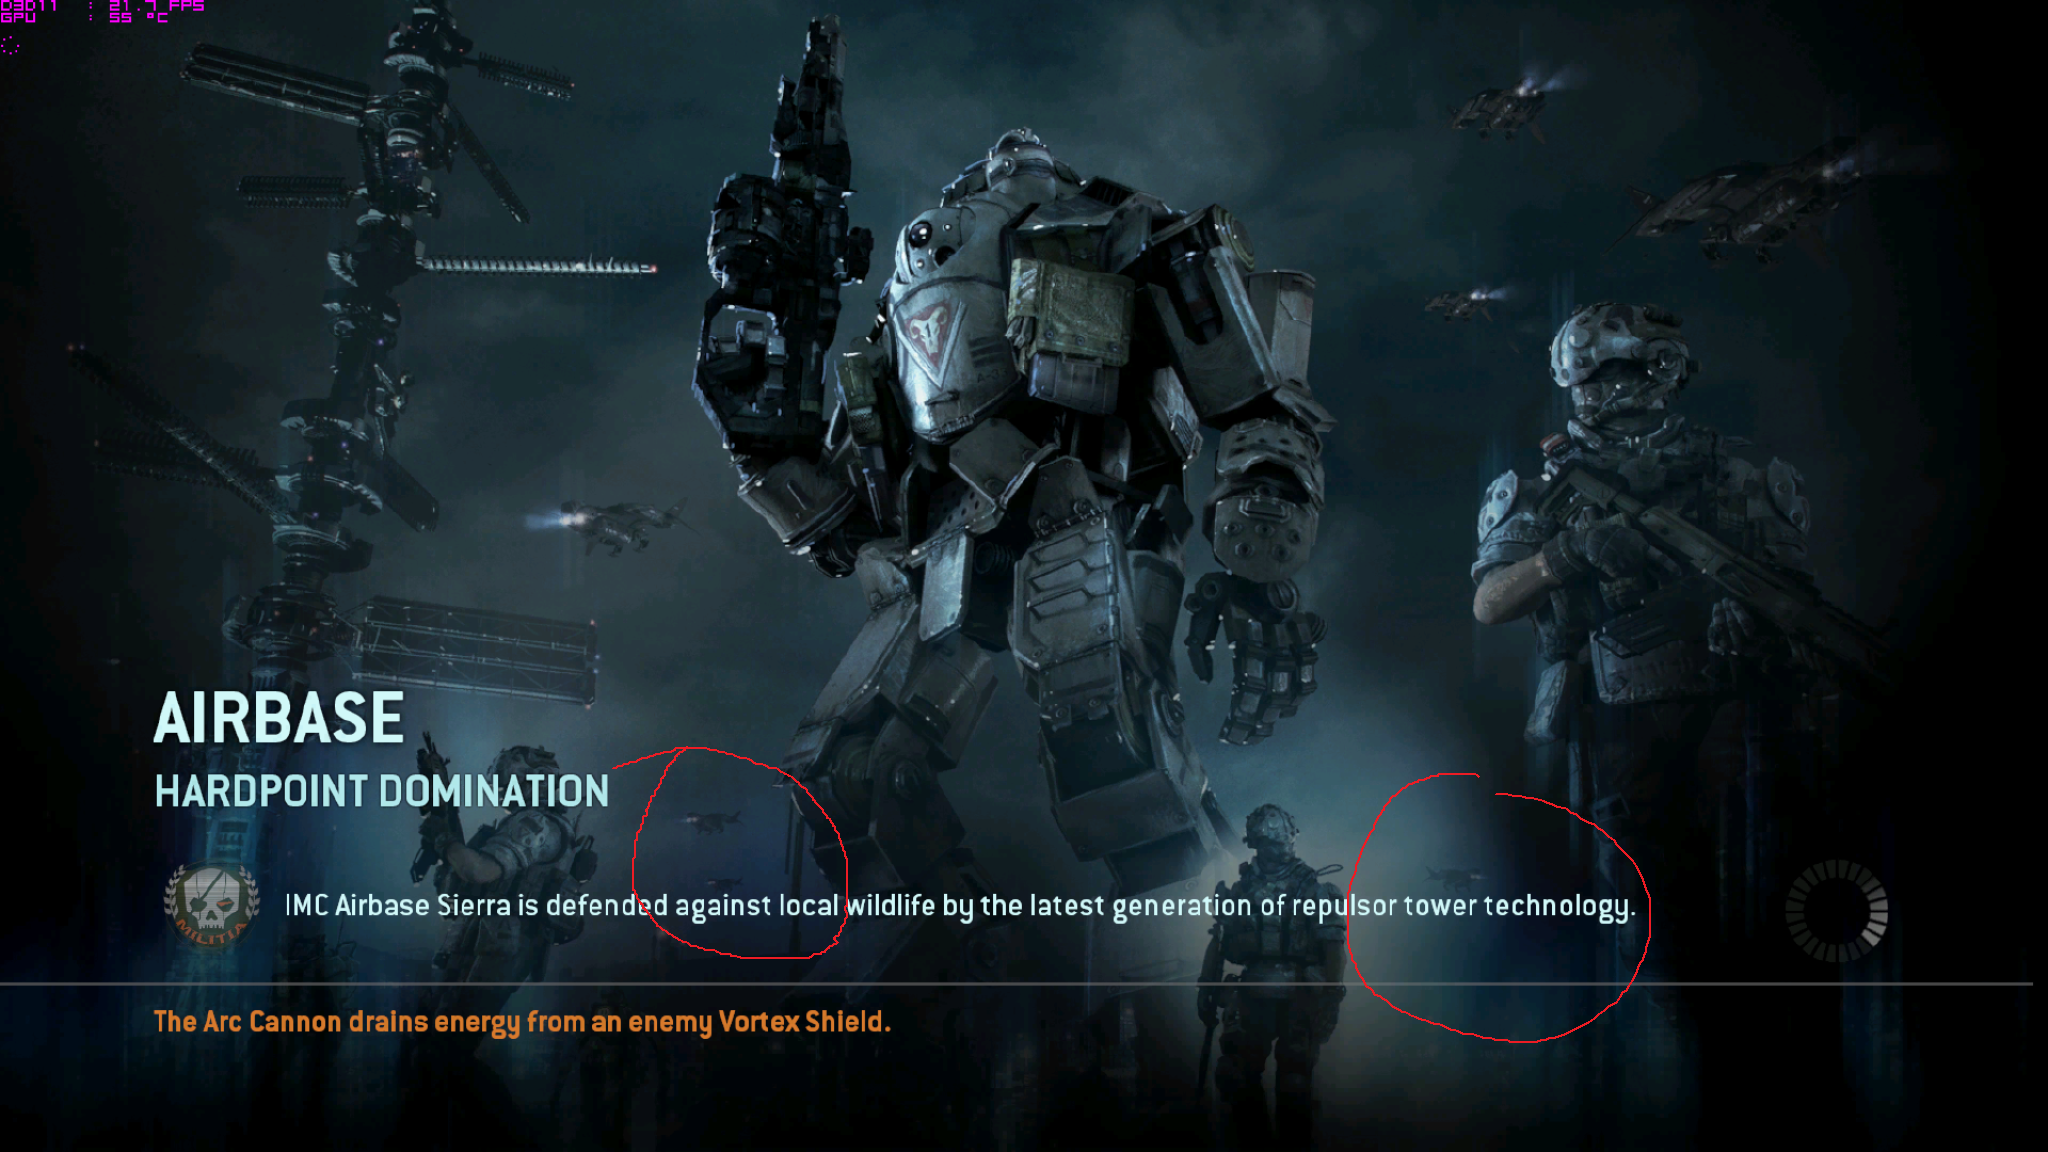 titanfall matchmaking problems